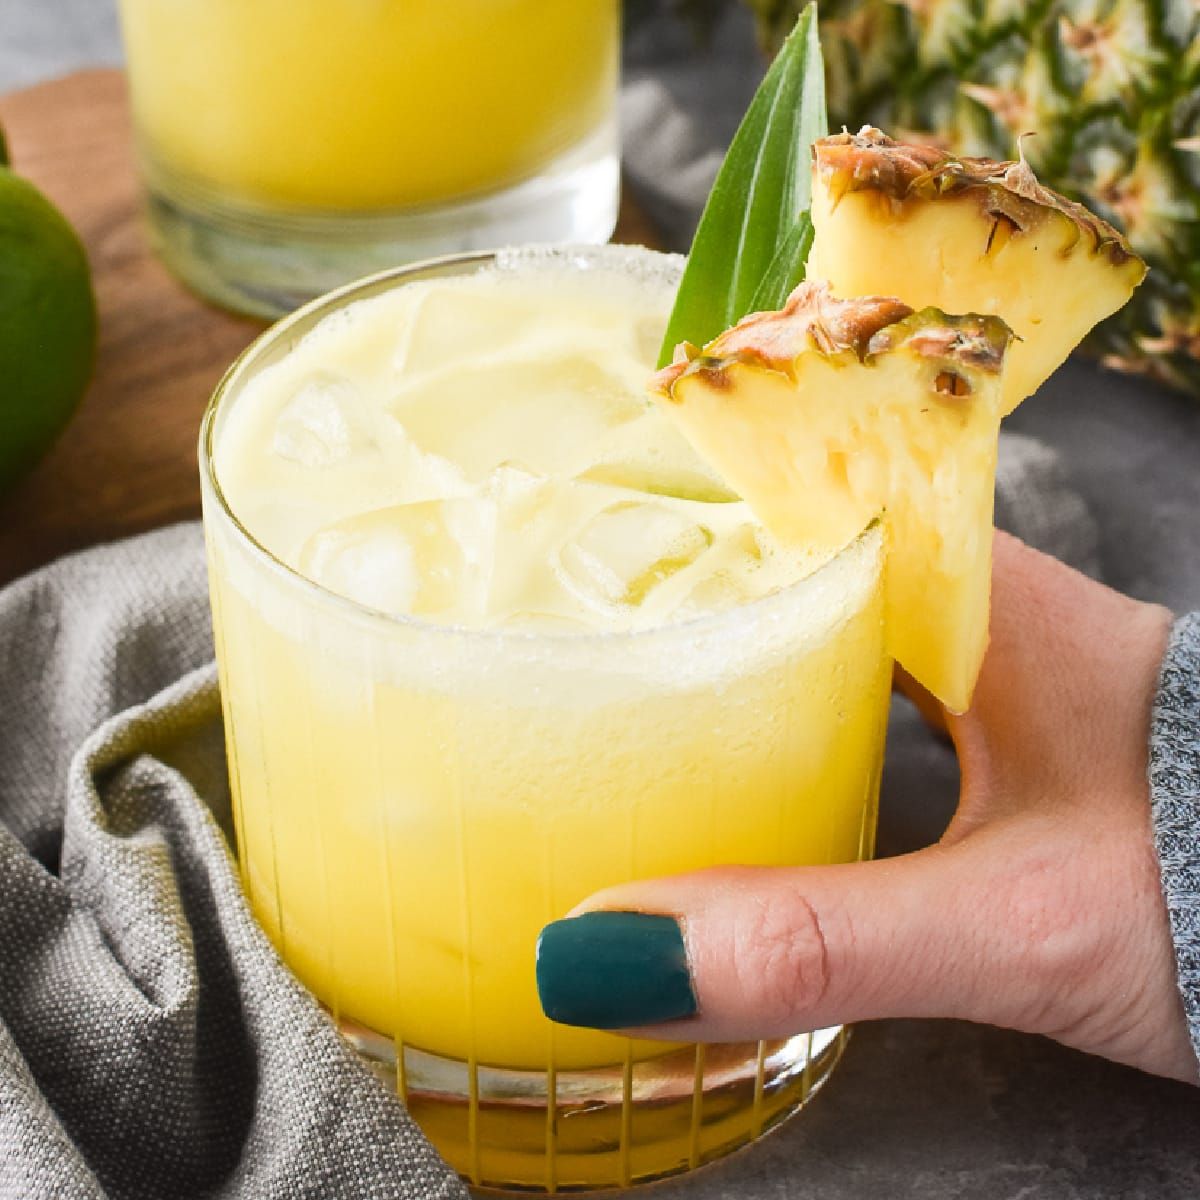 Fresh Pineapple Margarita with Mezcal - The Foodie and The Fix